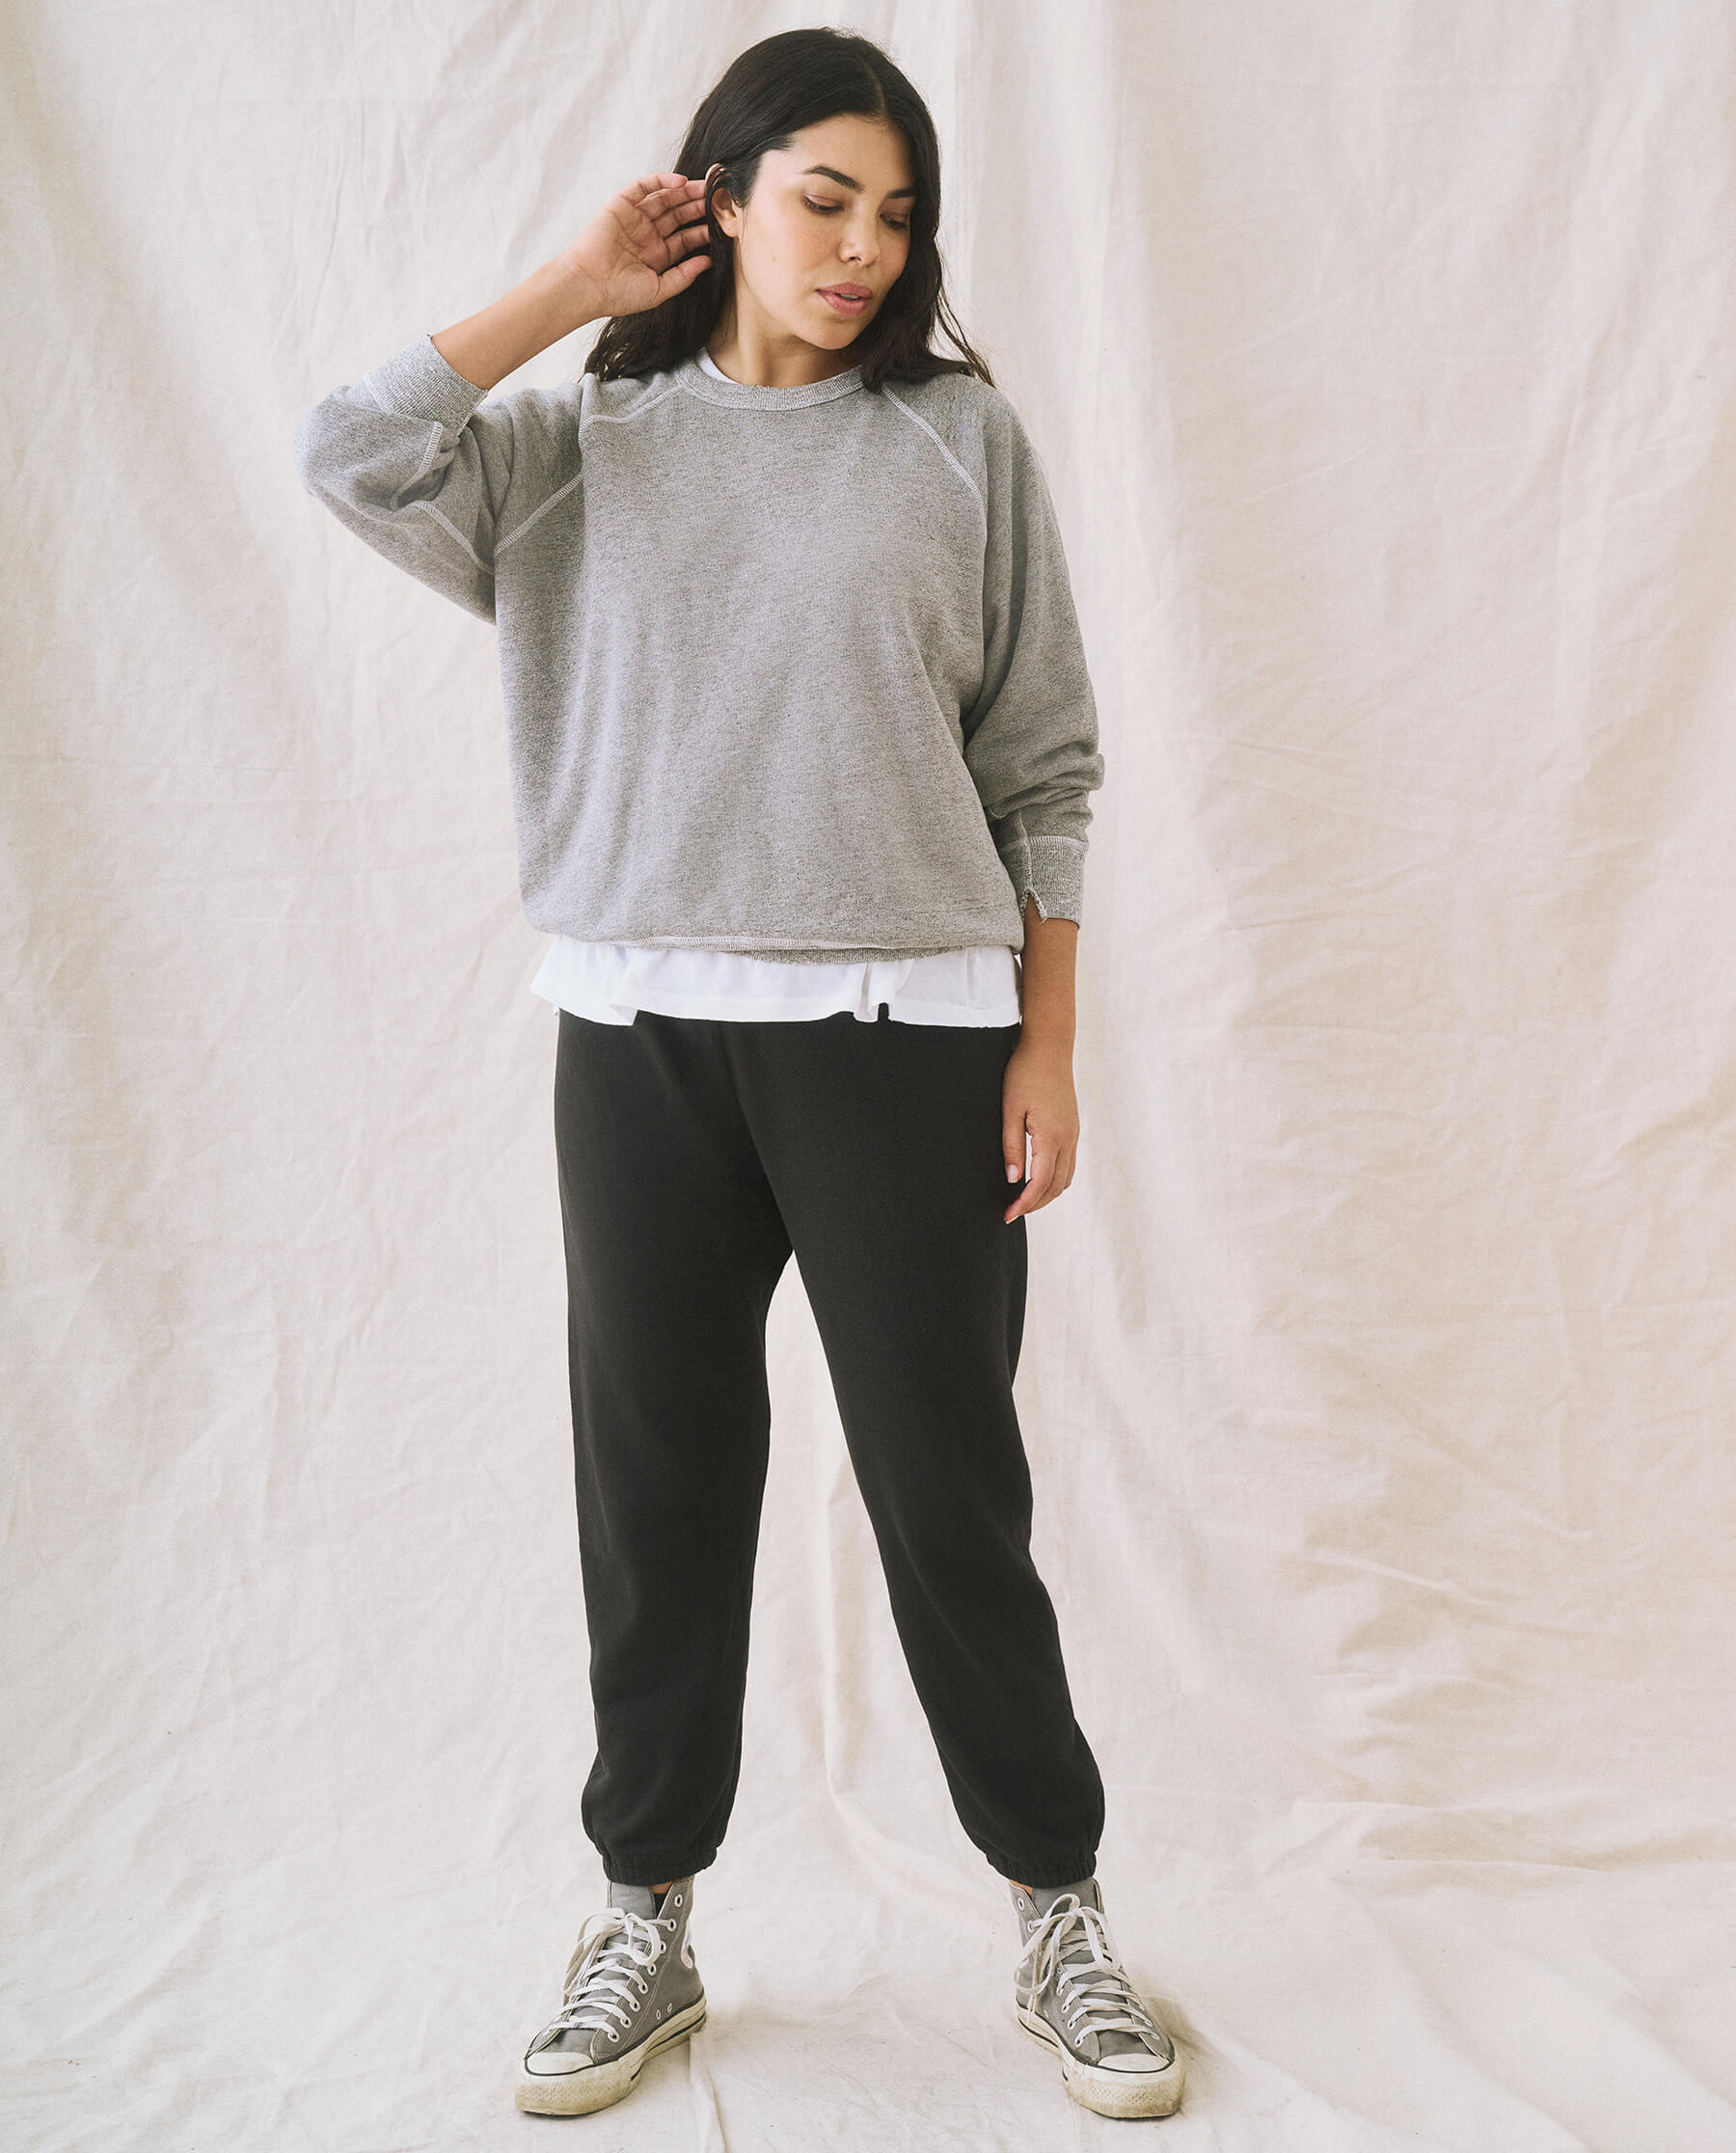 The Stadium Sweatpant. Solid -- ALMOST BLACK SWEATPANTS THE GREAT. CORE KNITS